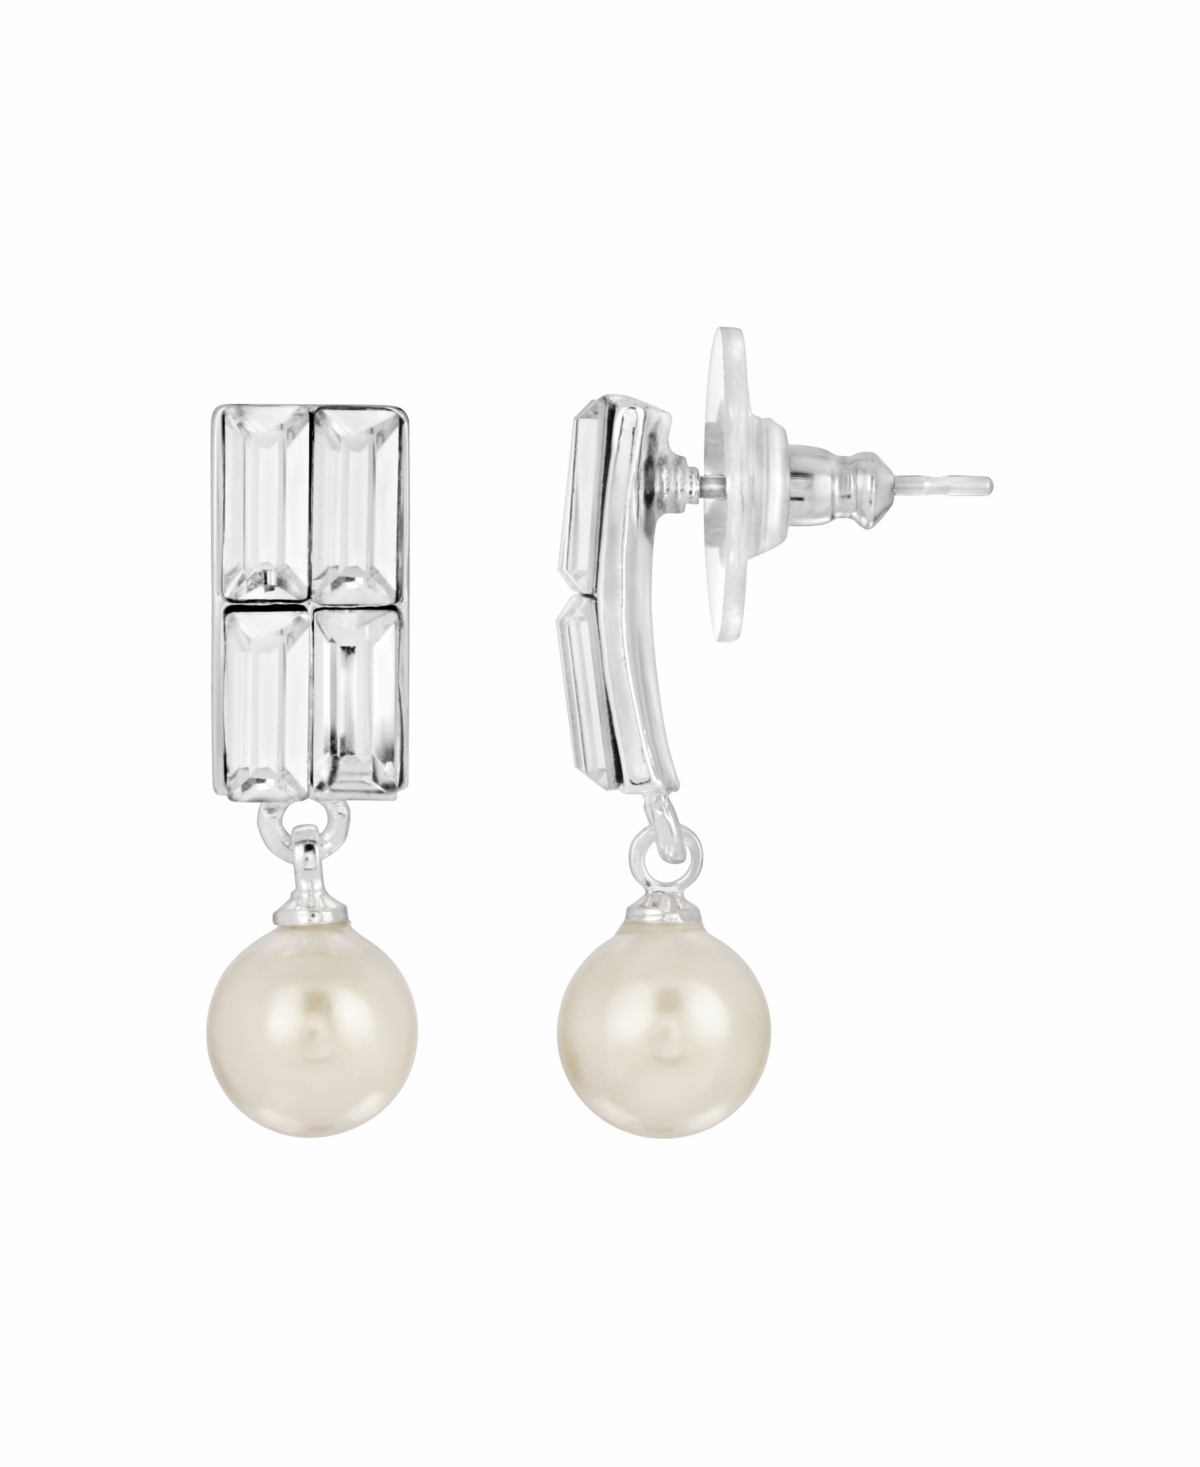 2028 Women's Crystal And Faux Imitation Pearl Drop Earrings In White